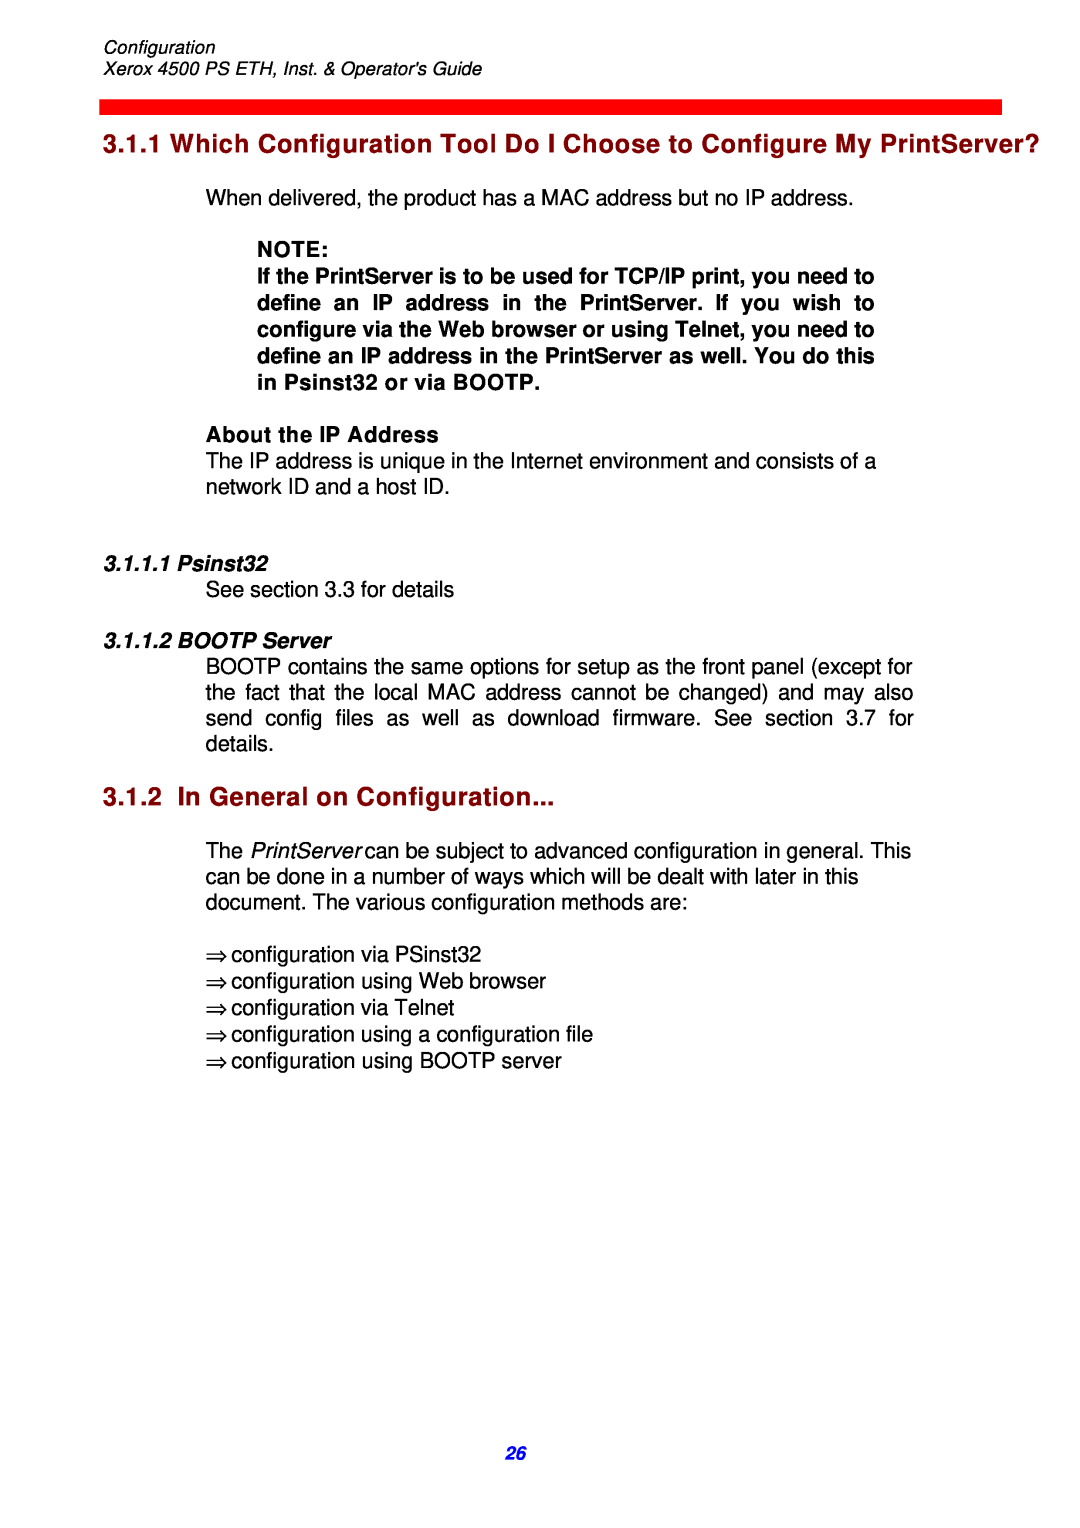 Xerox 4500 ps eth instruction manual In General on Configuration, About the IP Address, Psinst32, BOOTP Server 